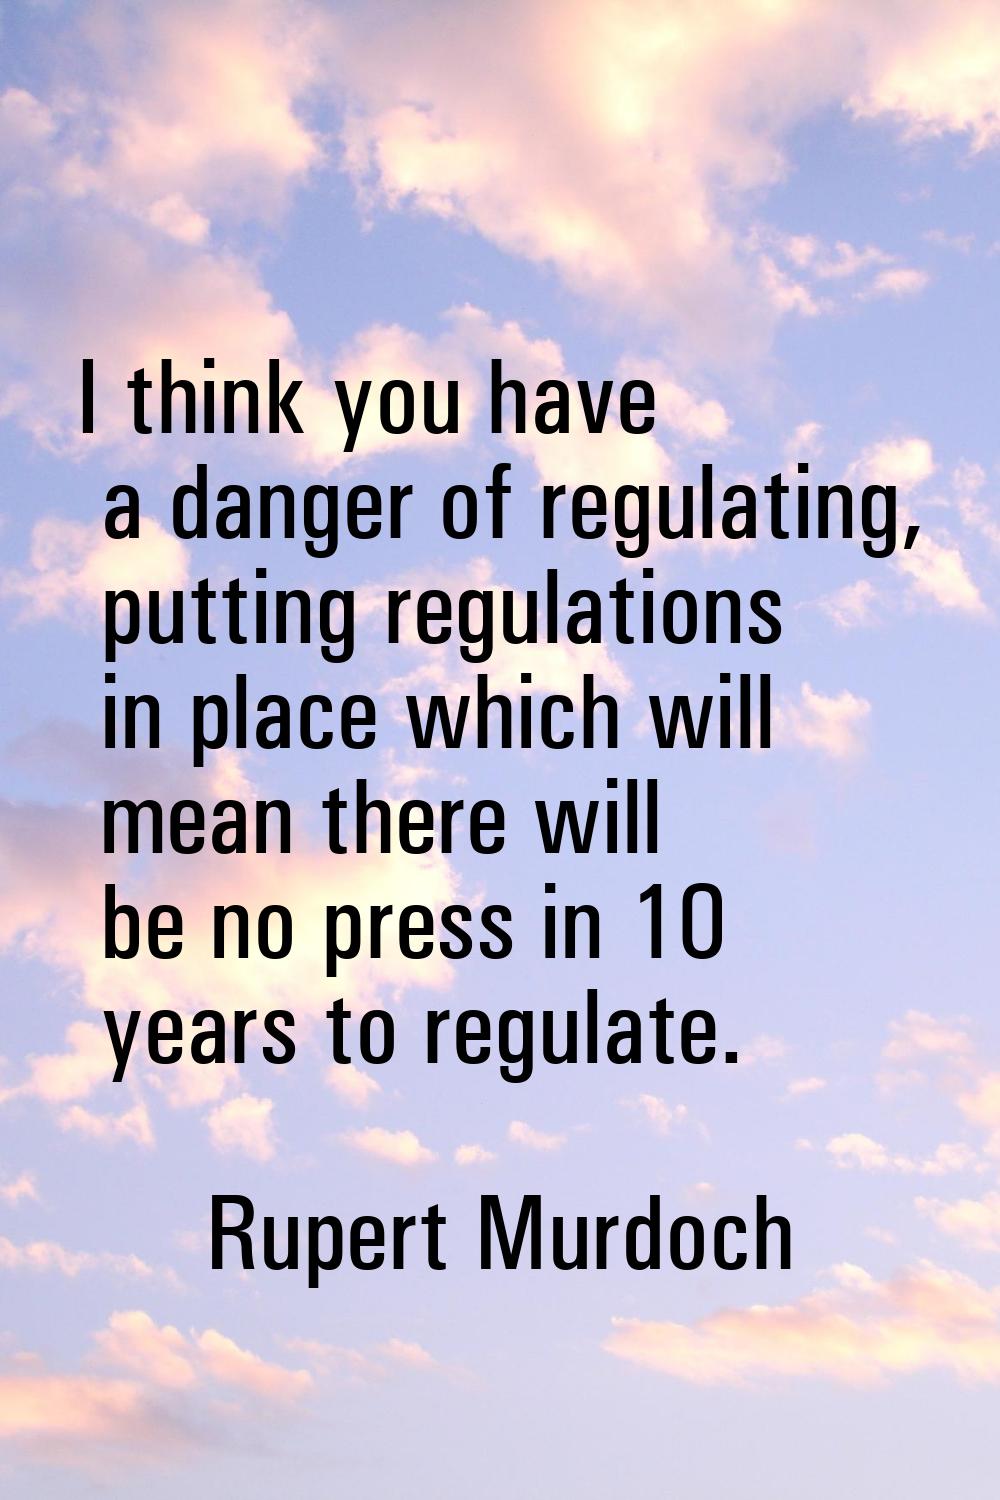 I think you have a danger of regulating, putting regulations in place which will mean there will be